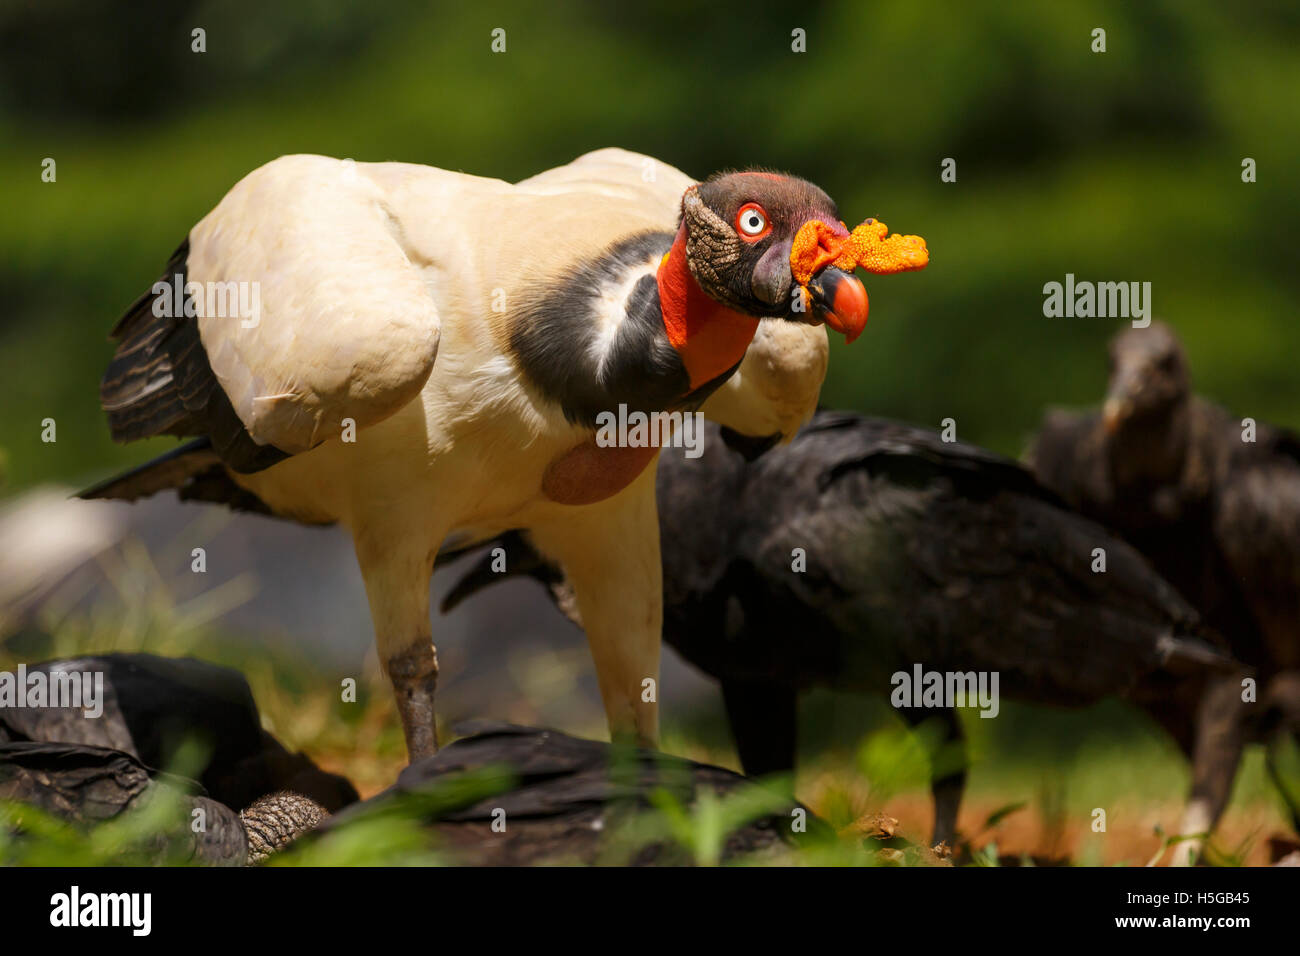 King Vulture, Sarcoramphus papa, famille Cathartidae. Banque D'Images